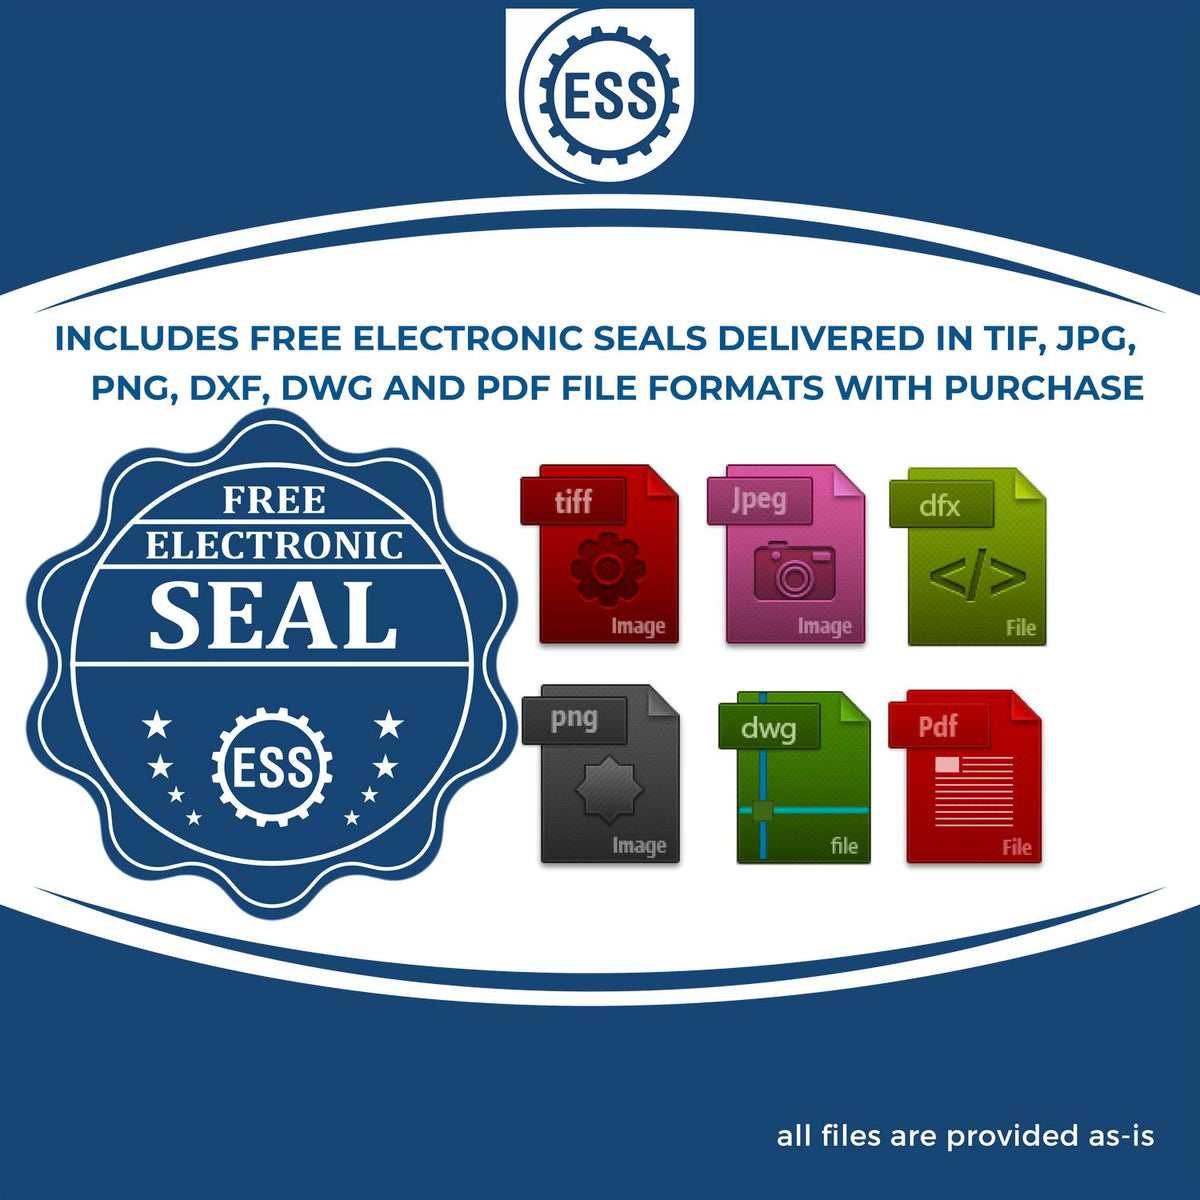 An infographic for the free electronic seal for the Gift Mississippi Engineer Seal illustrating the different file type icons such as DXF, DWG, TIF, JPG and PNG.